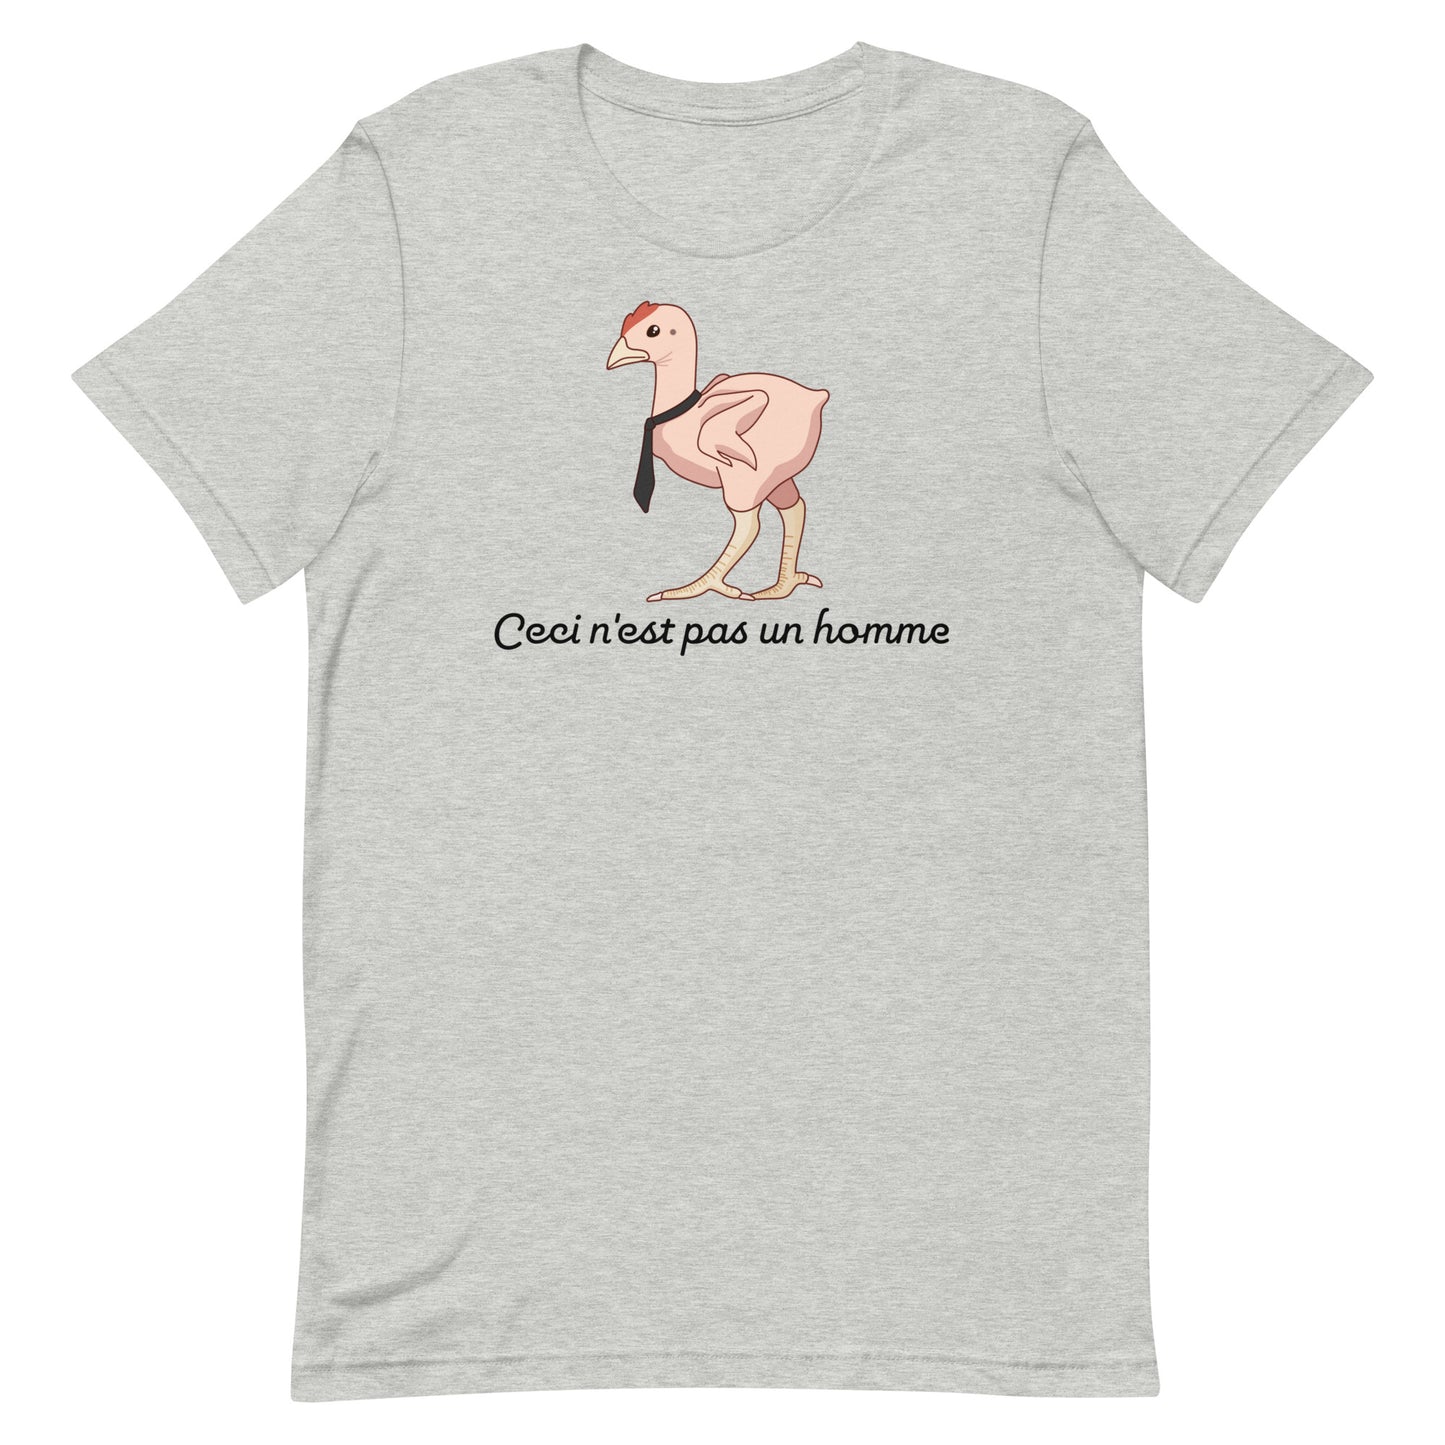 A grey crewneck t-shirt featuring an illustration of a featherless chicken wearing a tie. Text underneath the chicken reads "Ceci n'est pas un homme" in a cursive font.